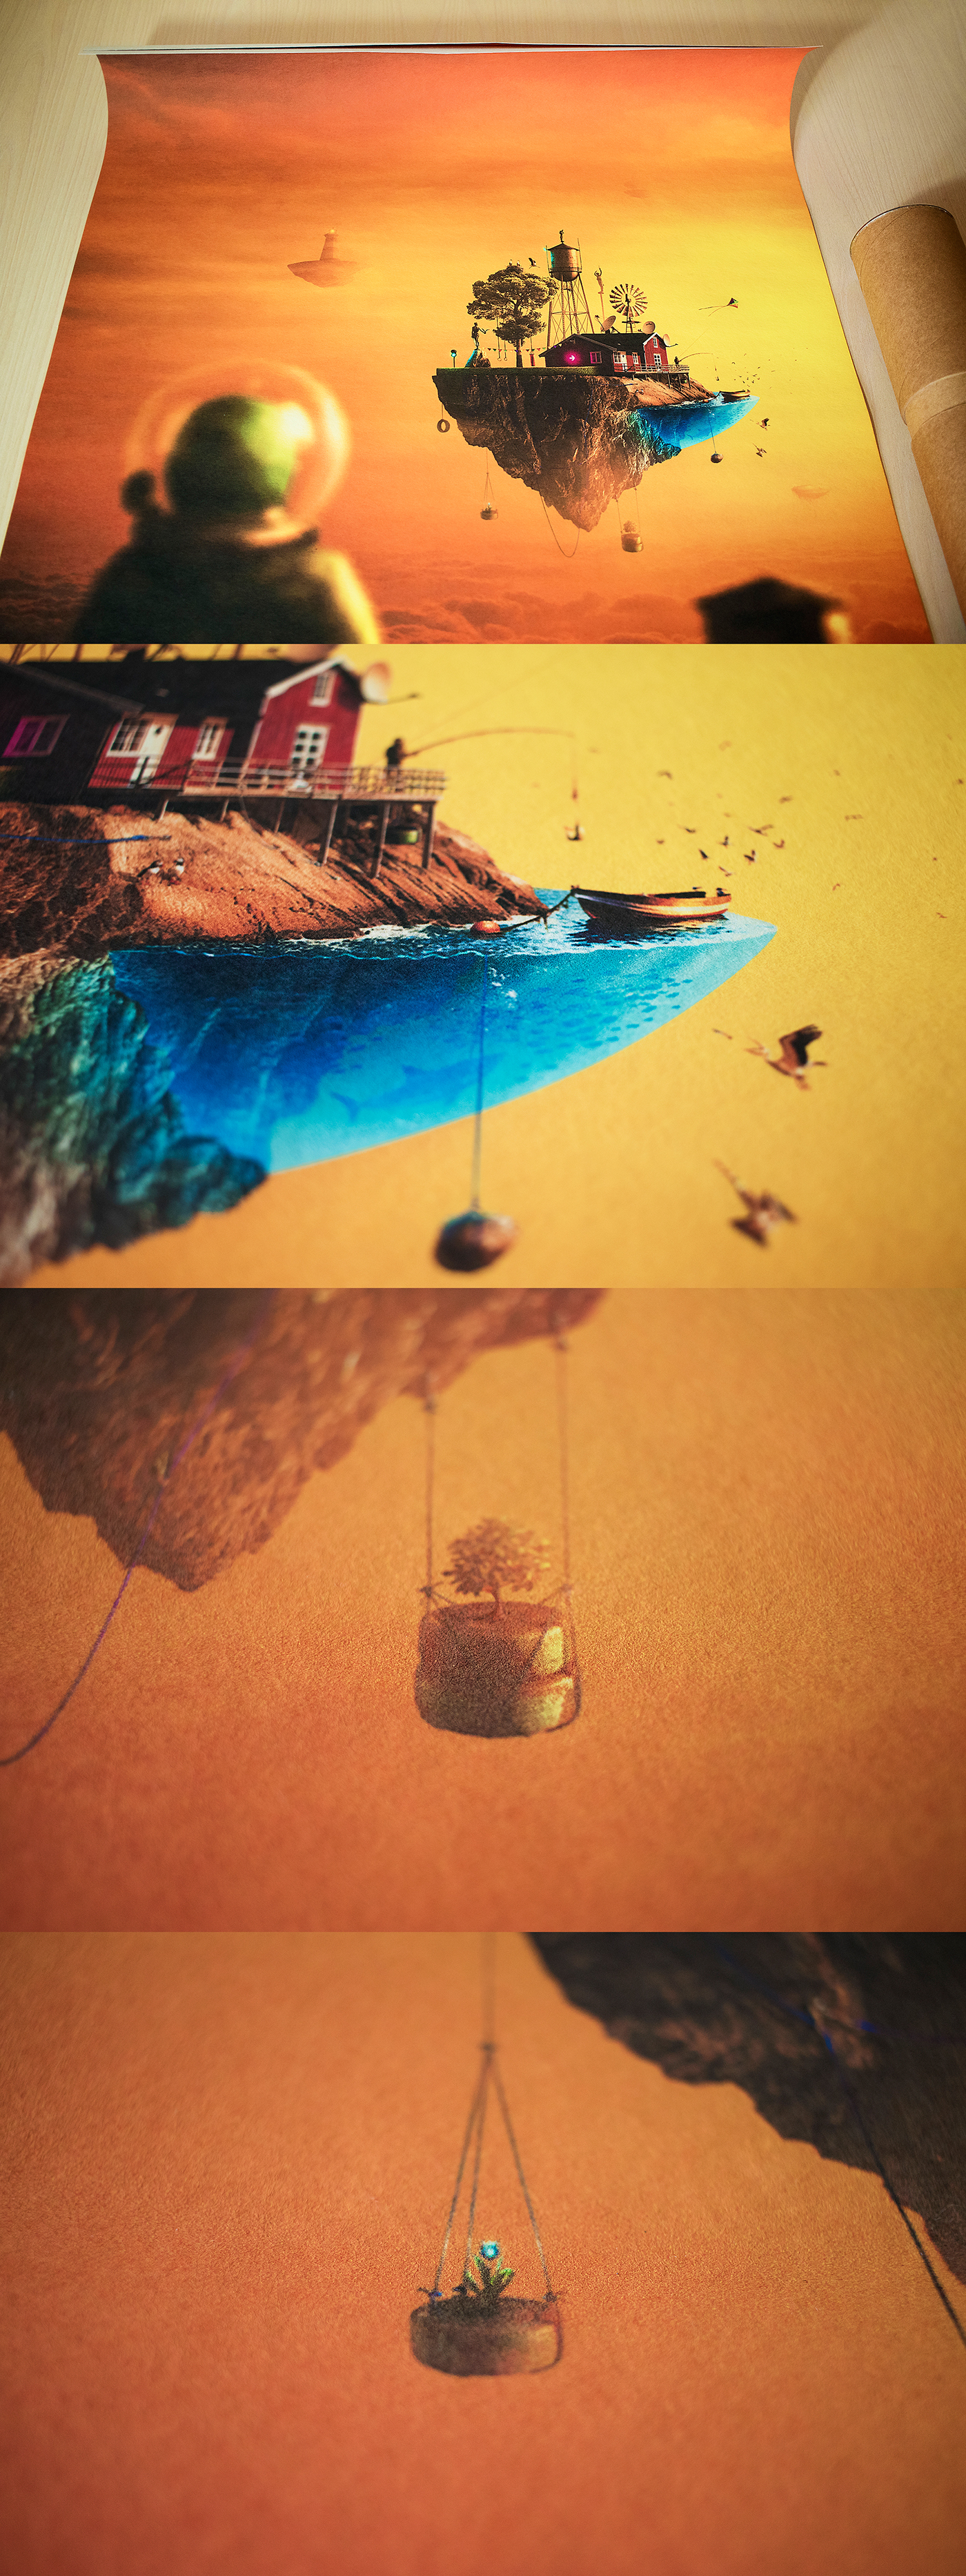 hello dreamland Flying Island Photo Manipulation  Matte Painting compositing people Covid 19 stay home